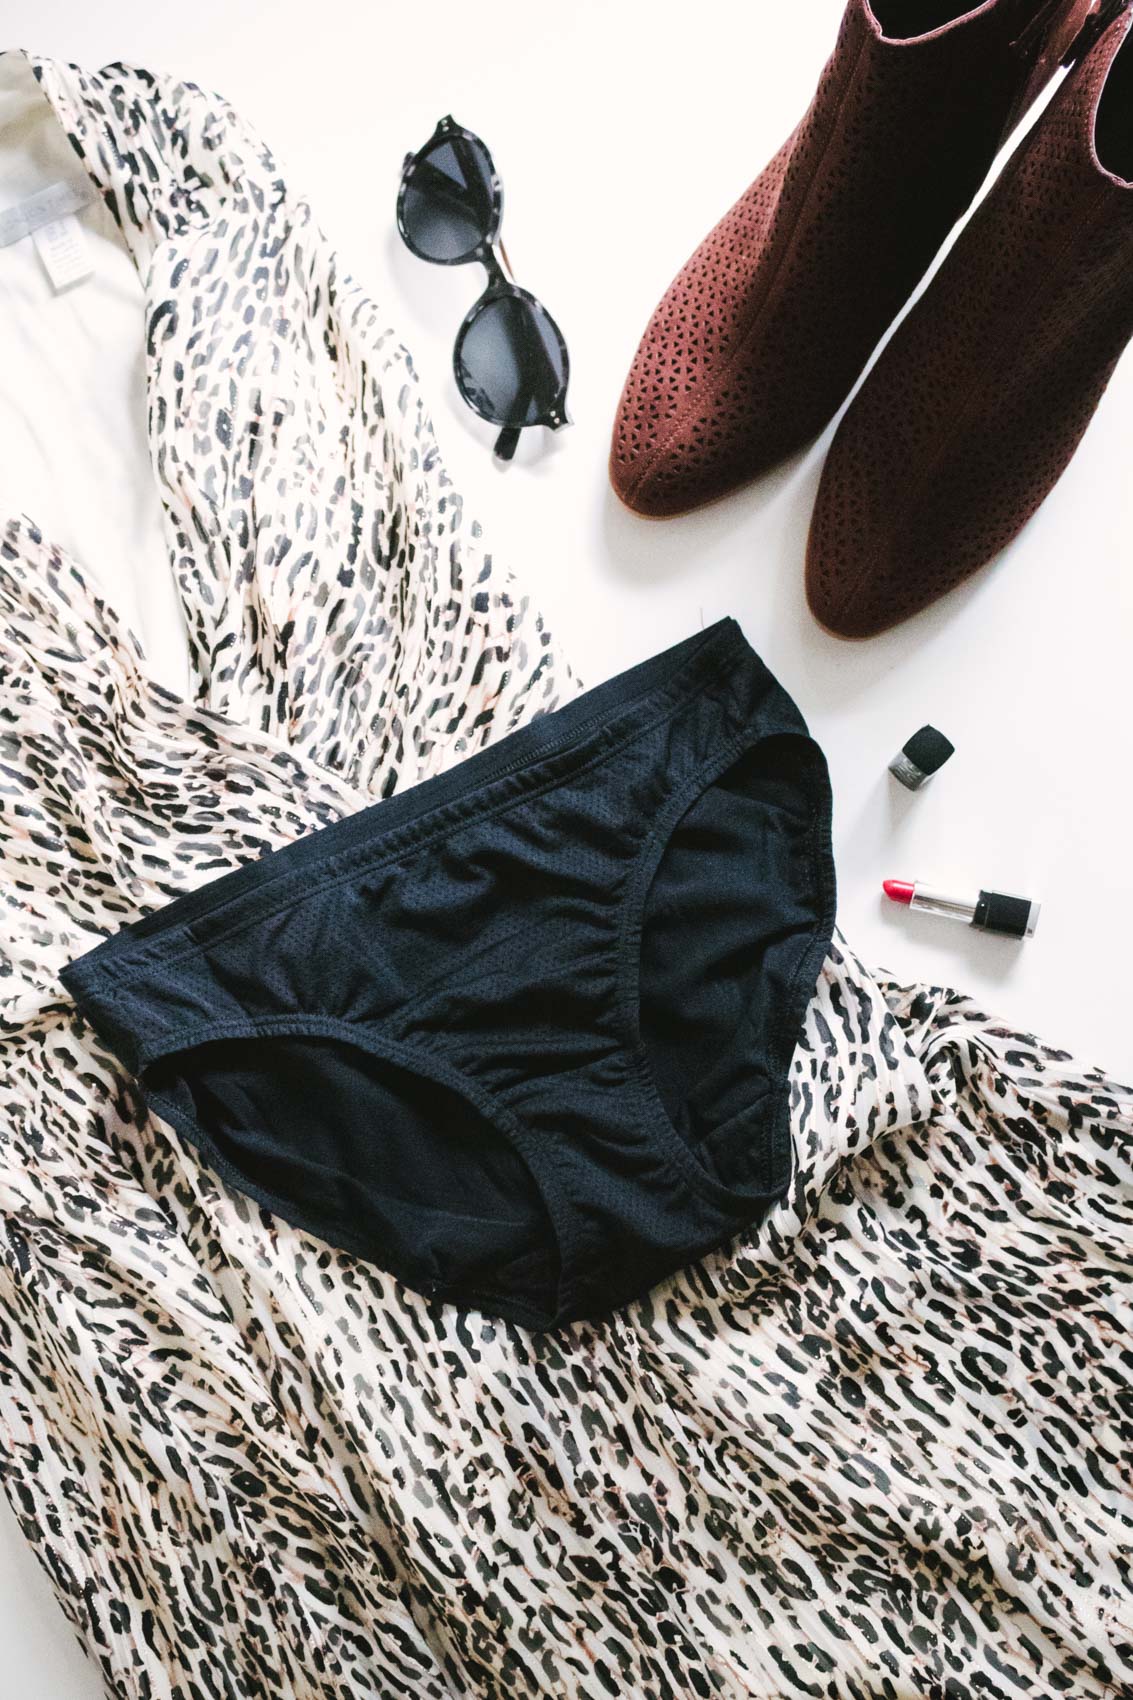 The best travel underwear for women that are breathable, lightweight and perfect for packing in your suitcase when traveling